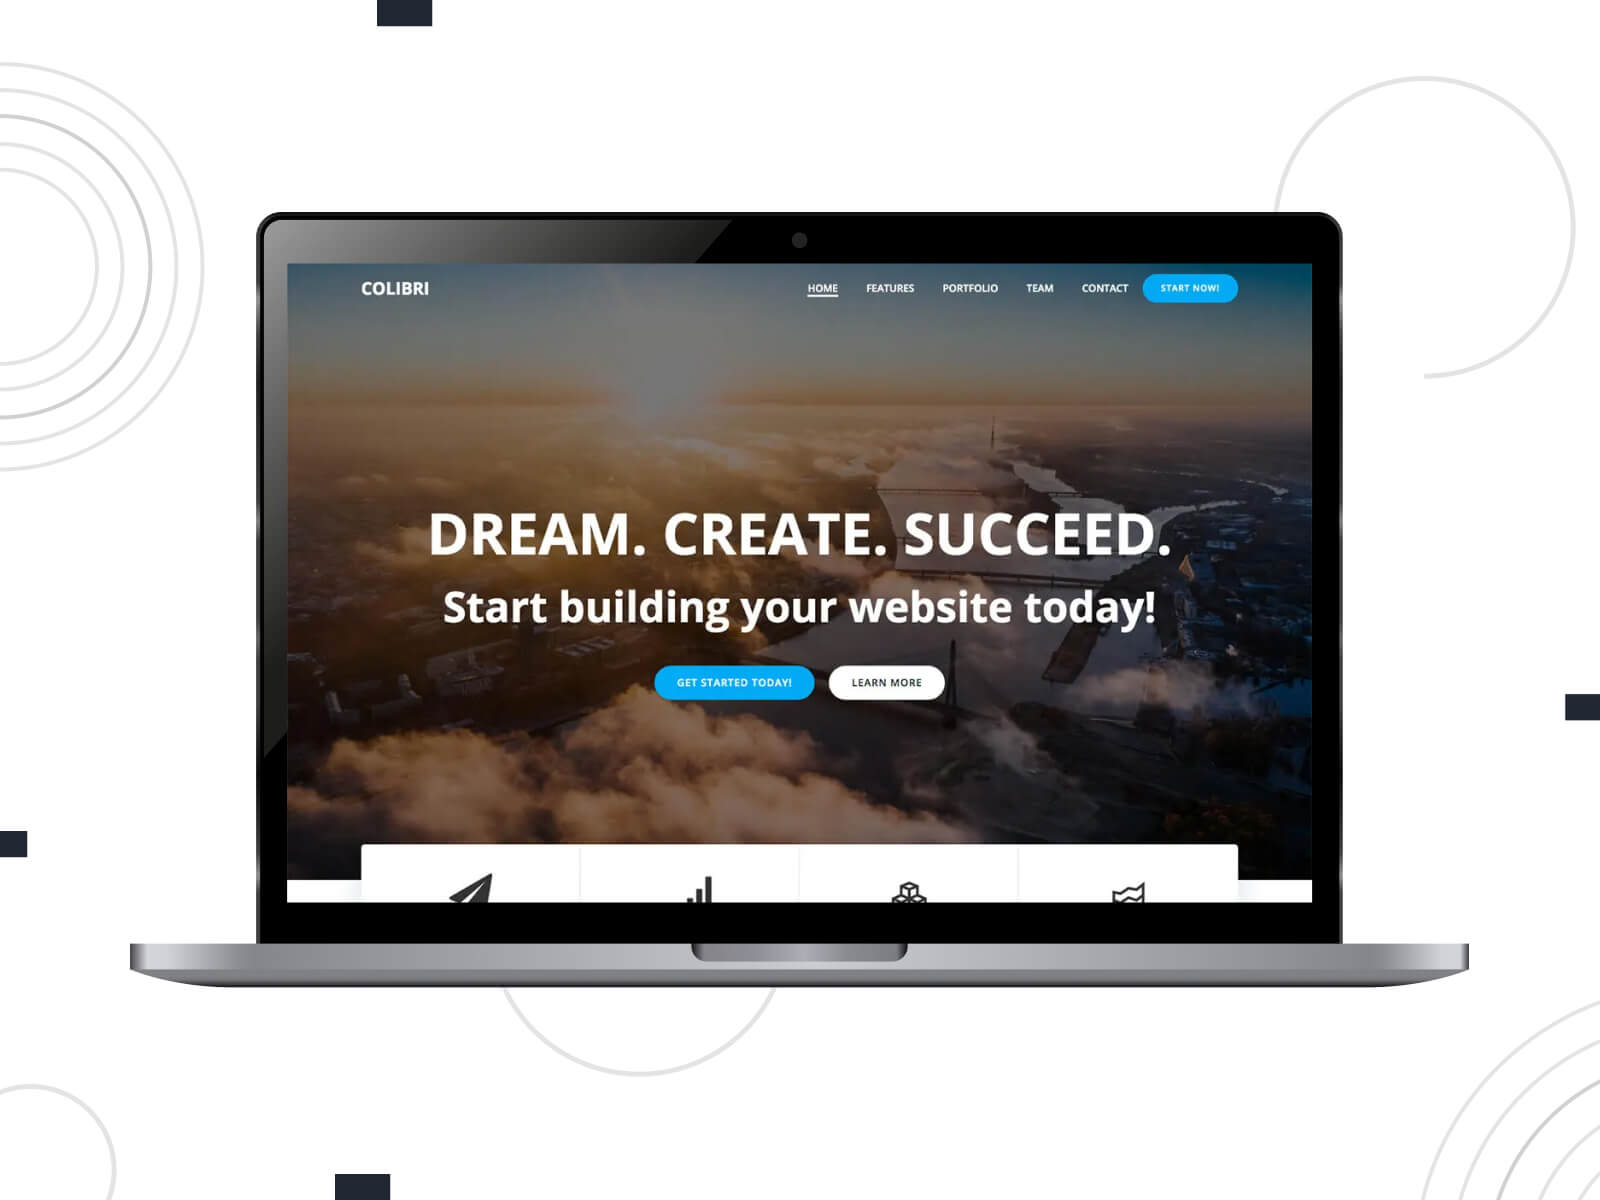 Picture of Colibri WP - shadowed, rich, this boutique theme is celebrated as one of the best WordPress themes for small-scale business sites in dark olive green, medium turquoise, and dim gray color combination.